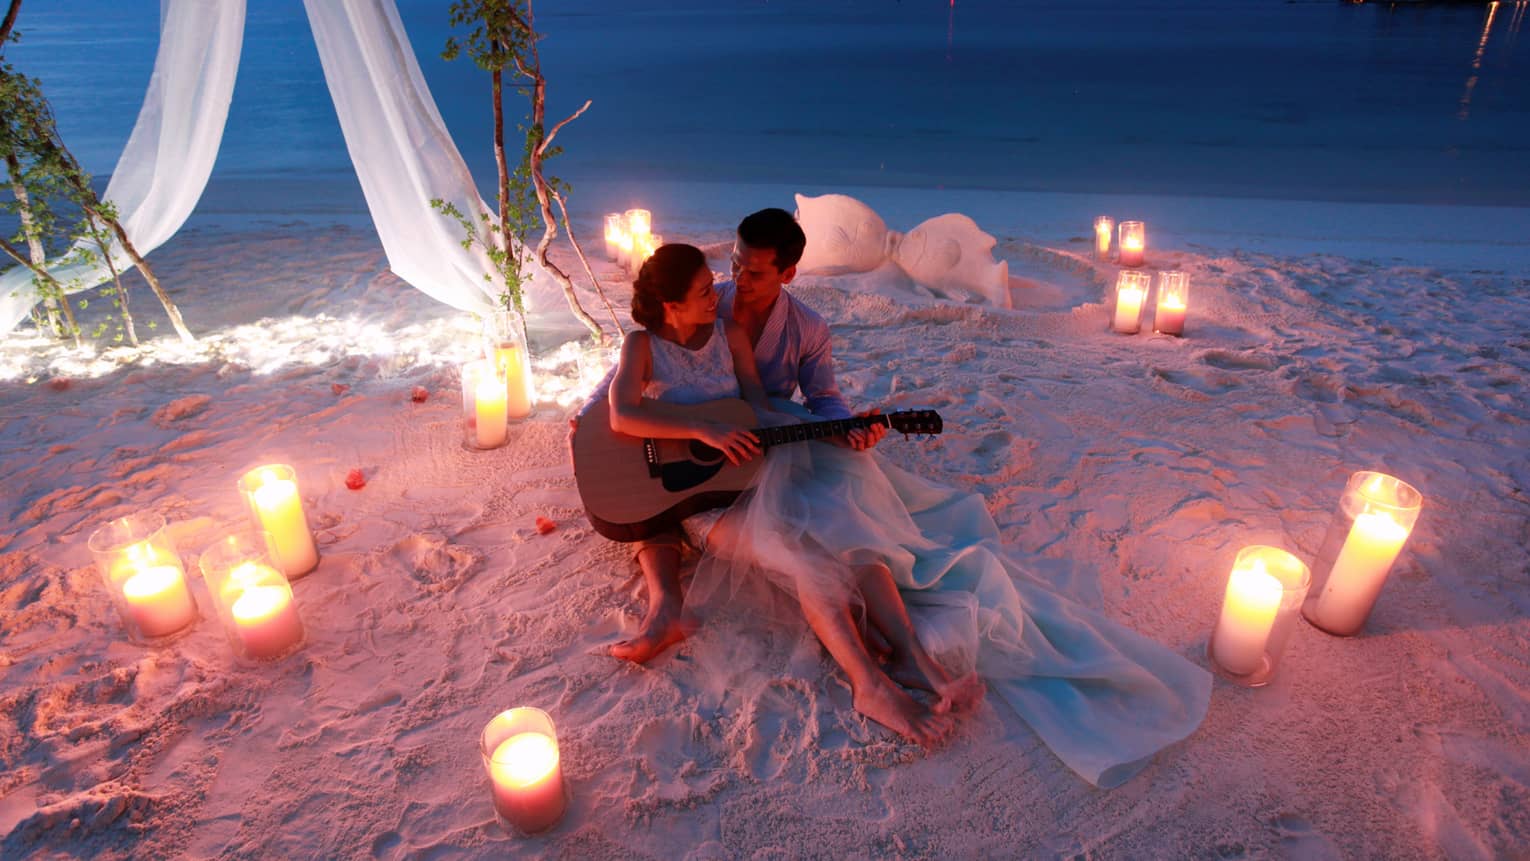 Man and woman hold guitar on sand beach surrounded by candles at night